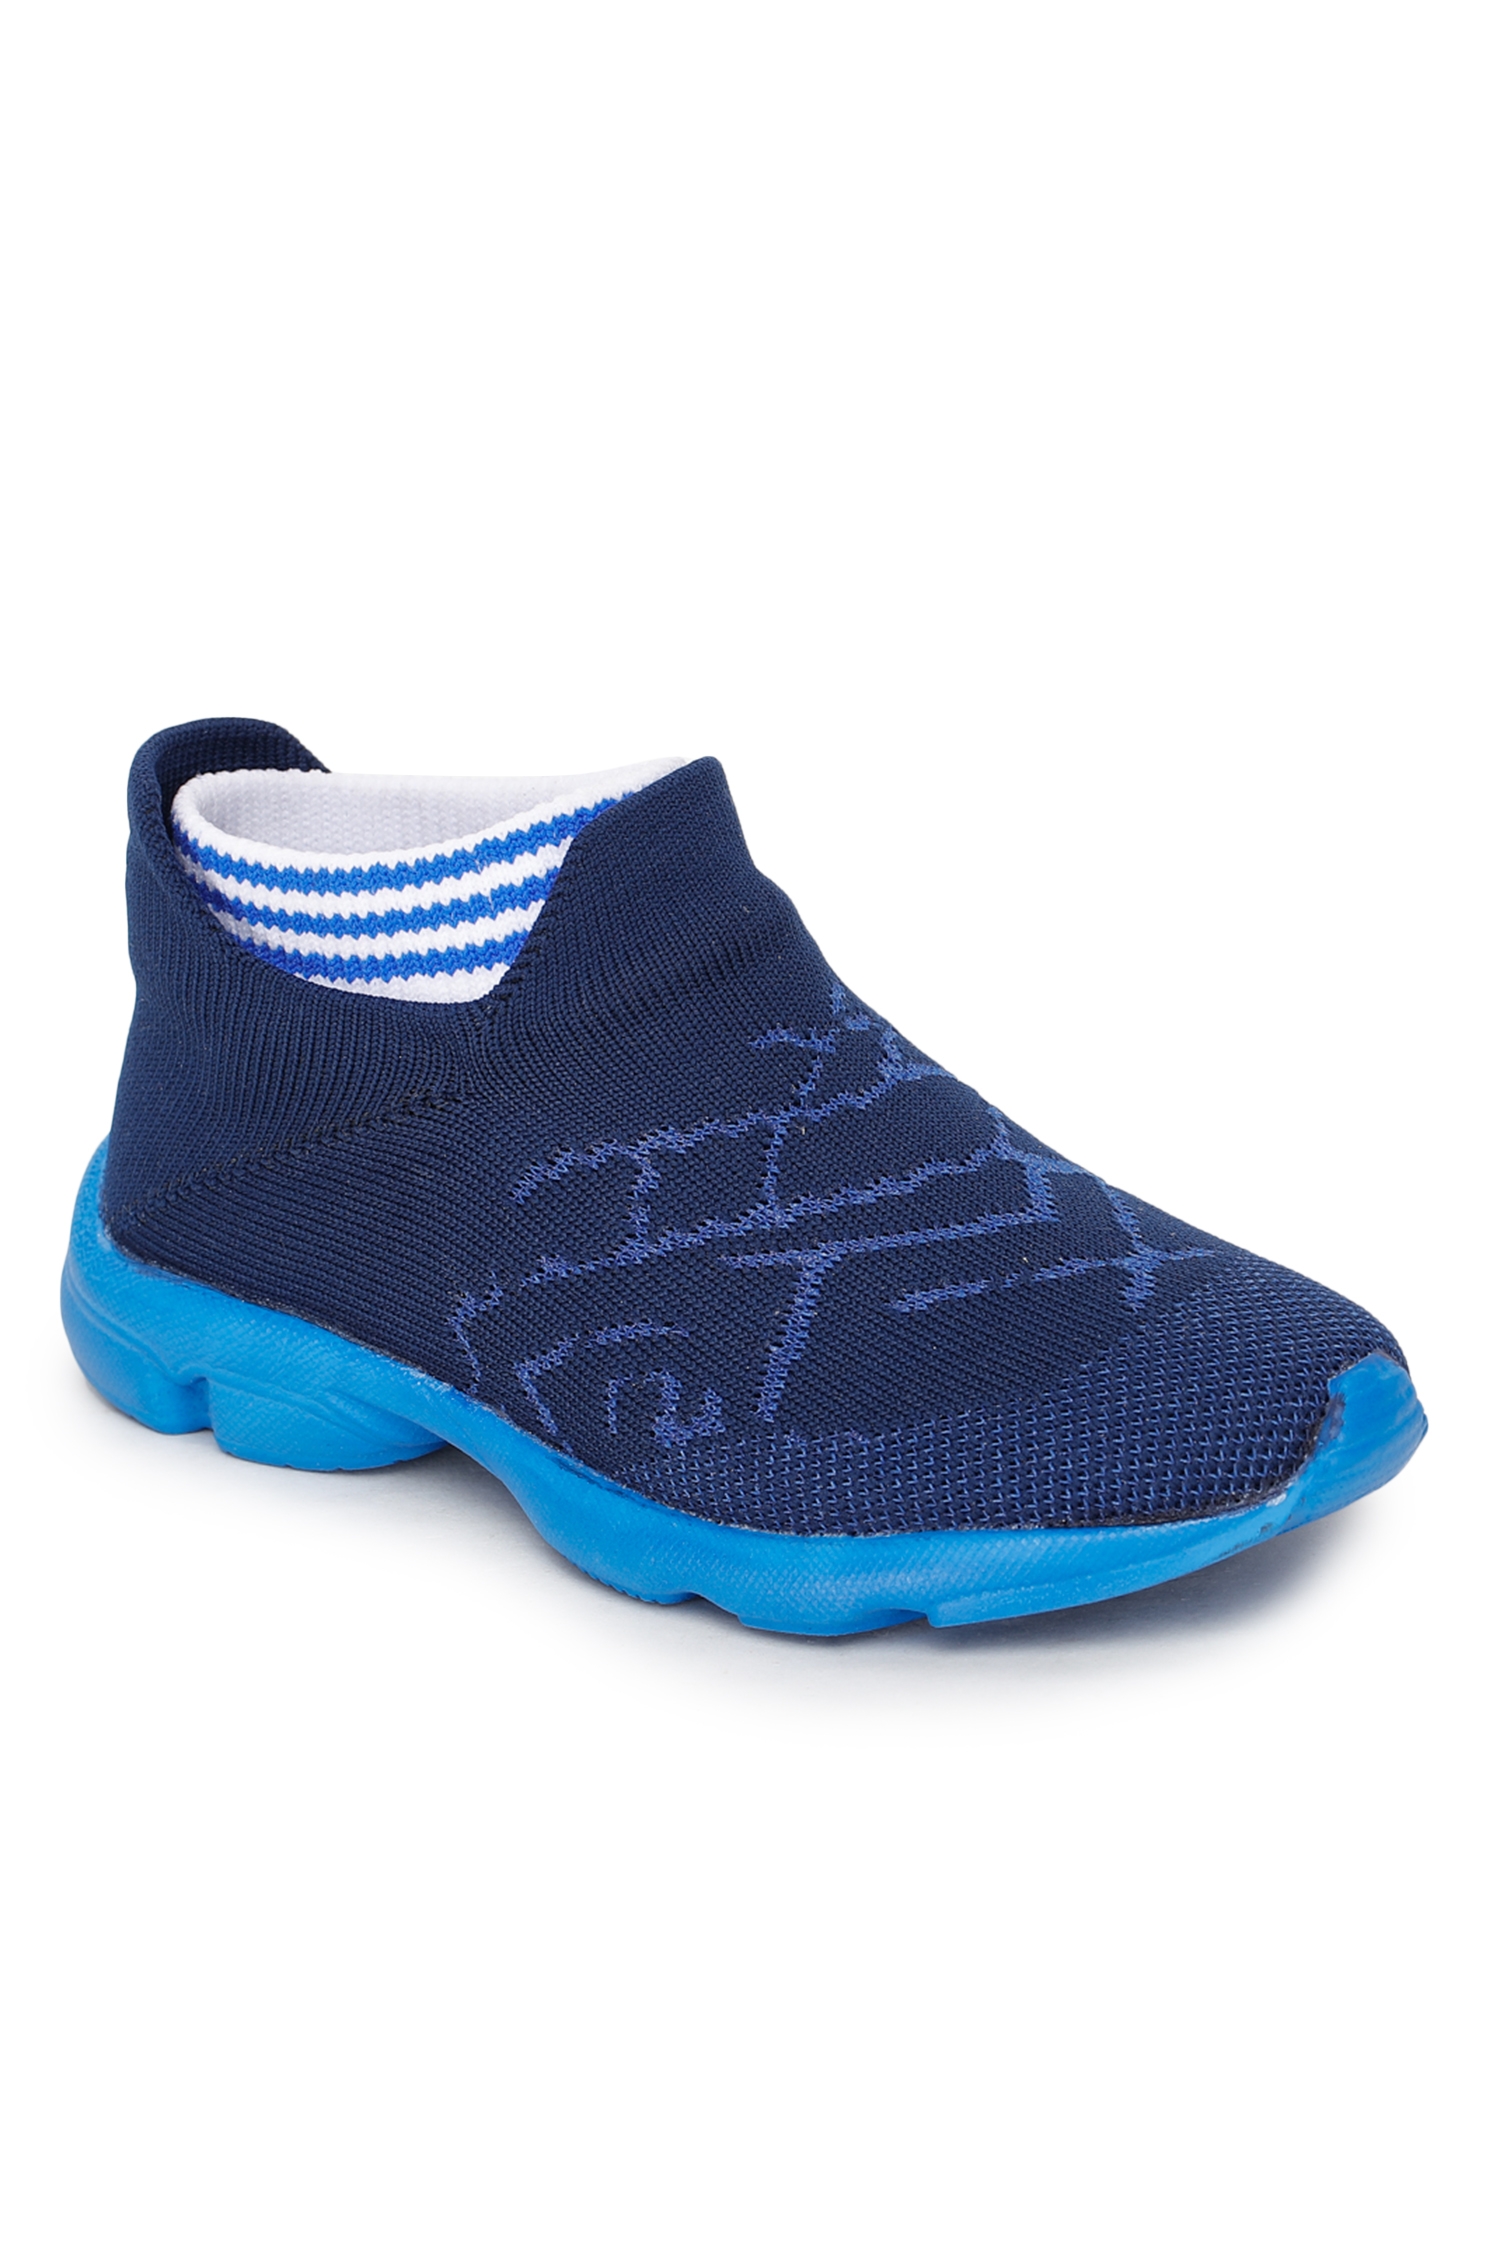 Lucy & Luke by Liberty KSN-207 R.Blue Casual Shoes for Kids